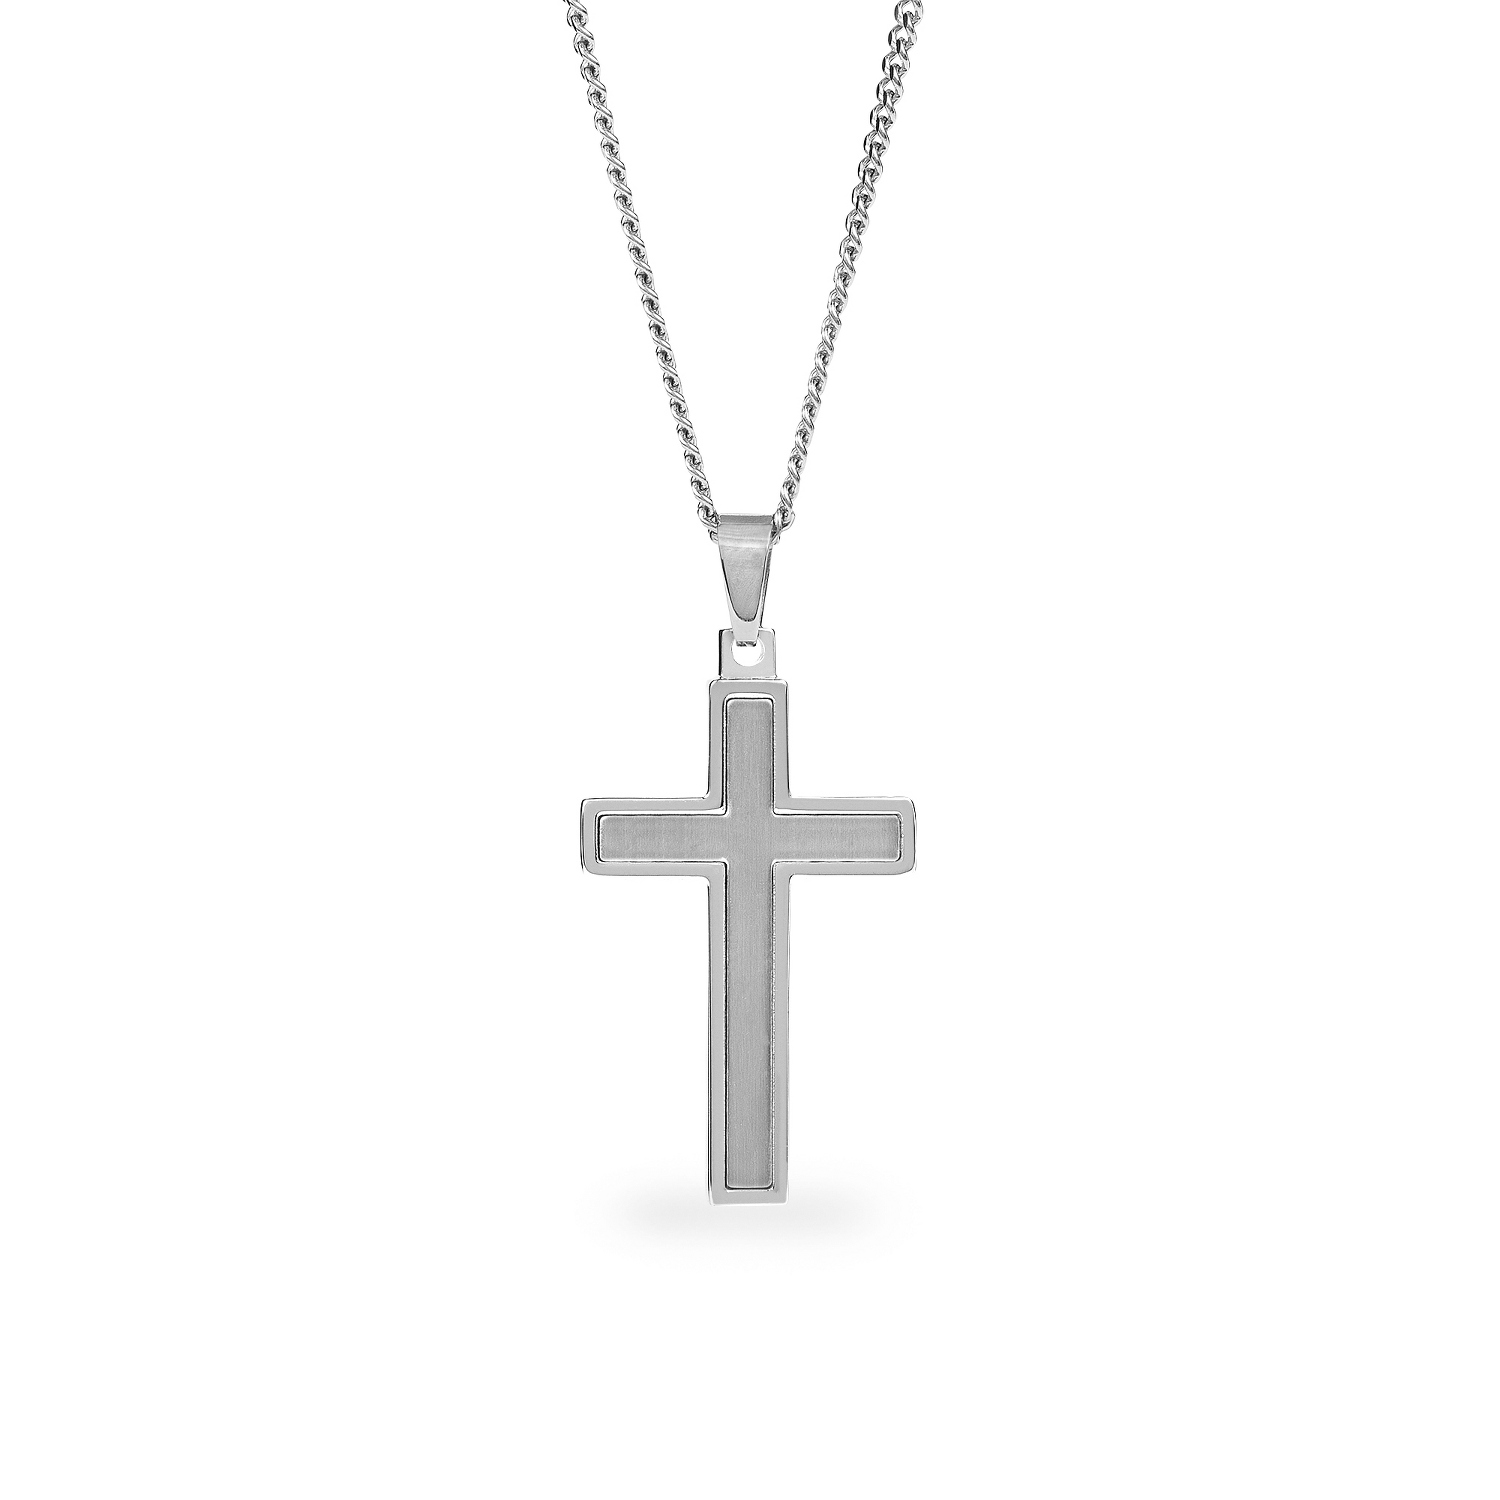 Boys Two-Tone Silver Cross Necklace